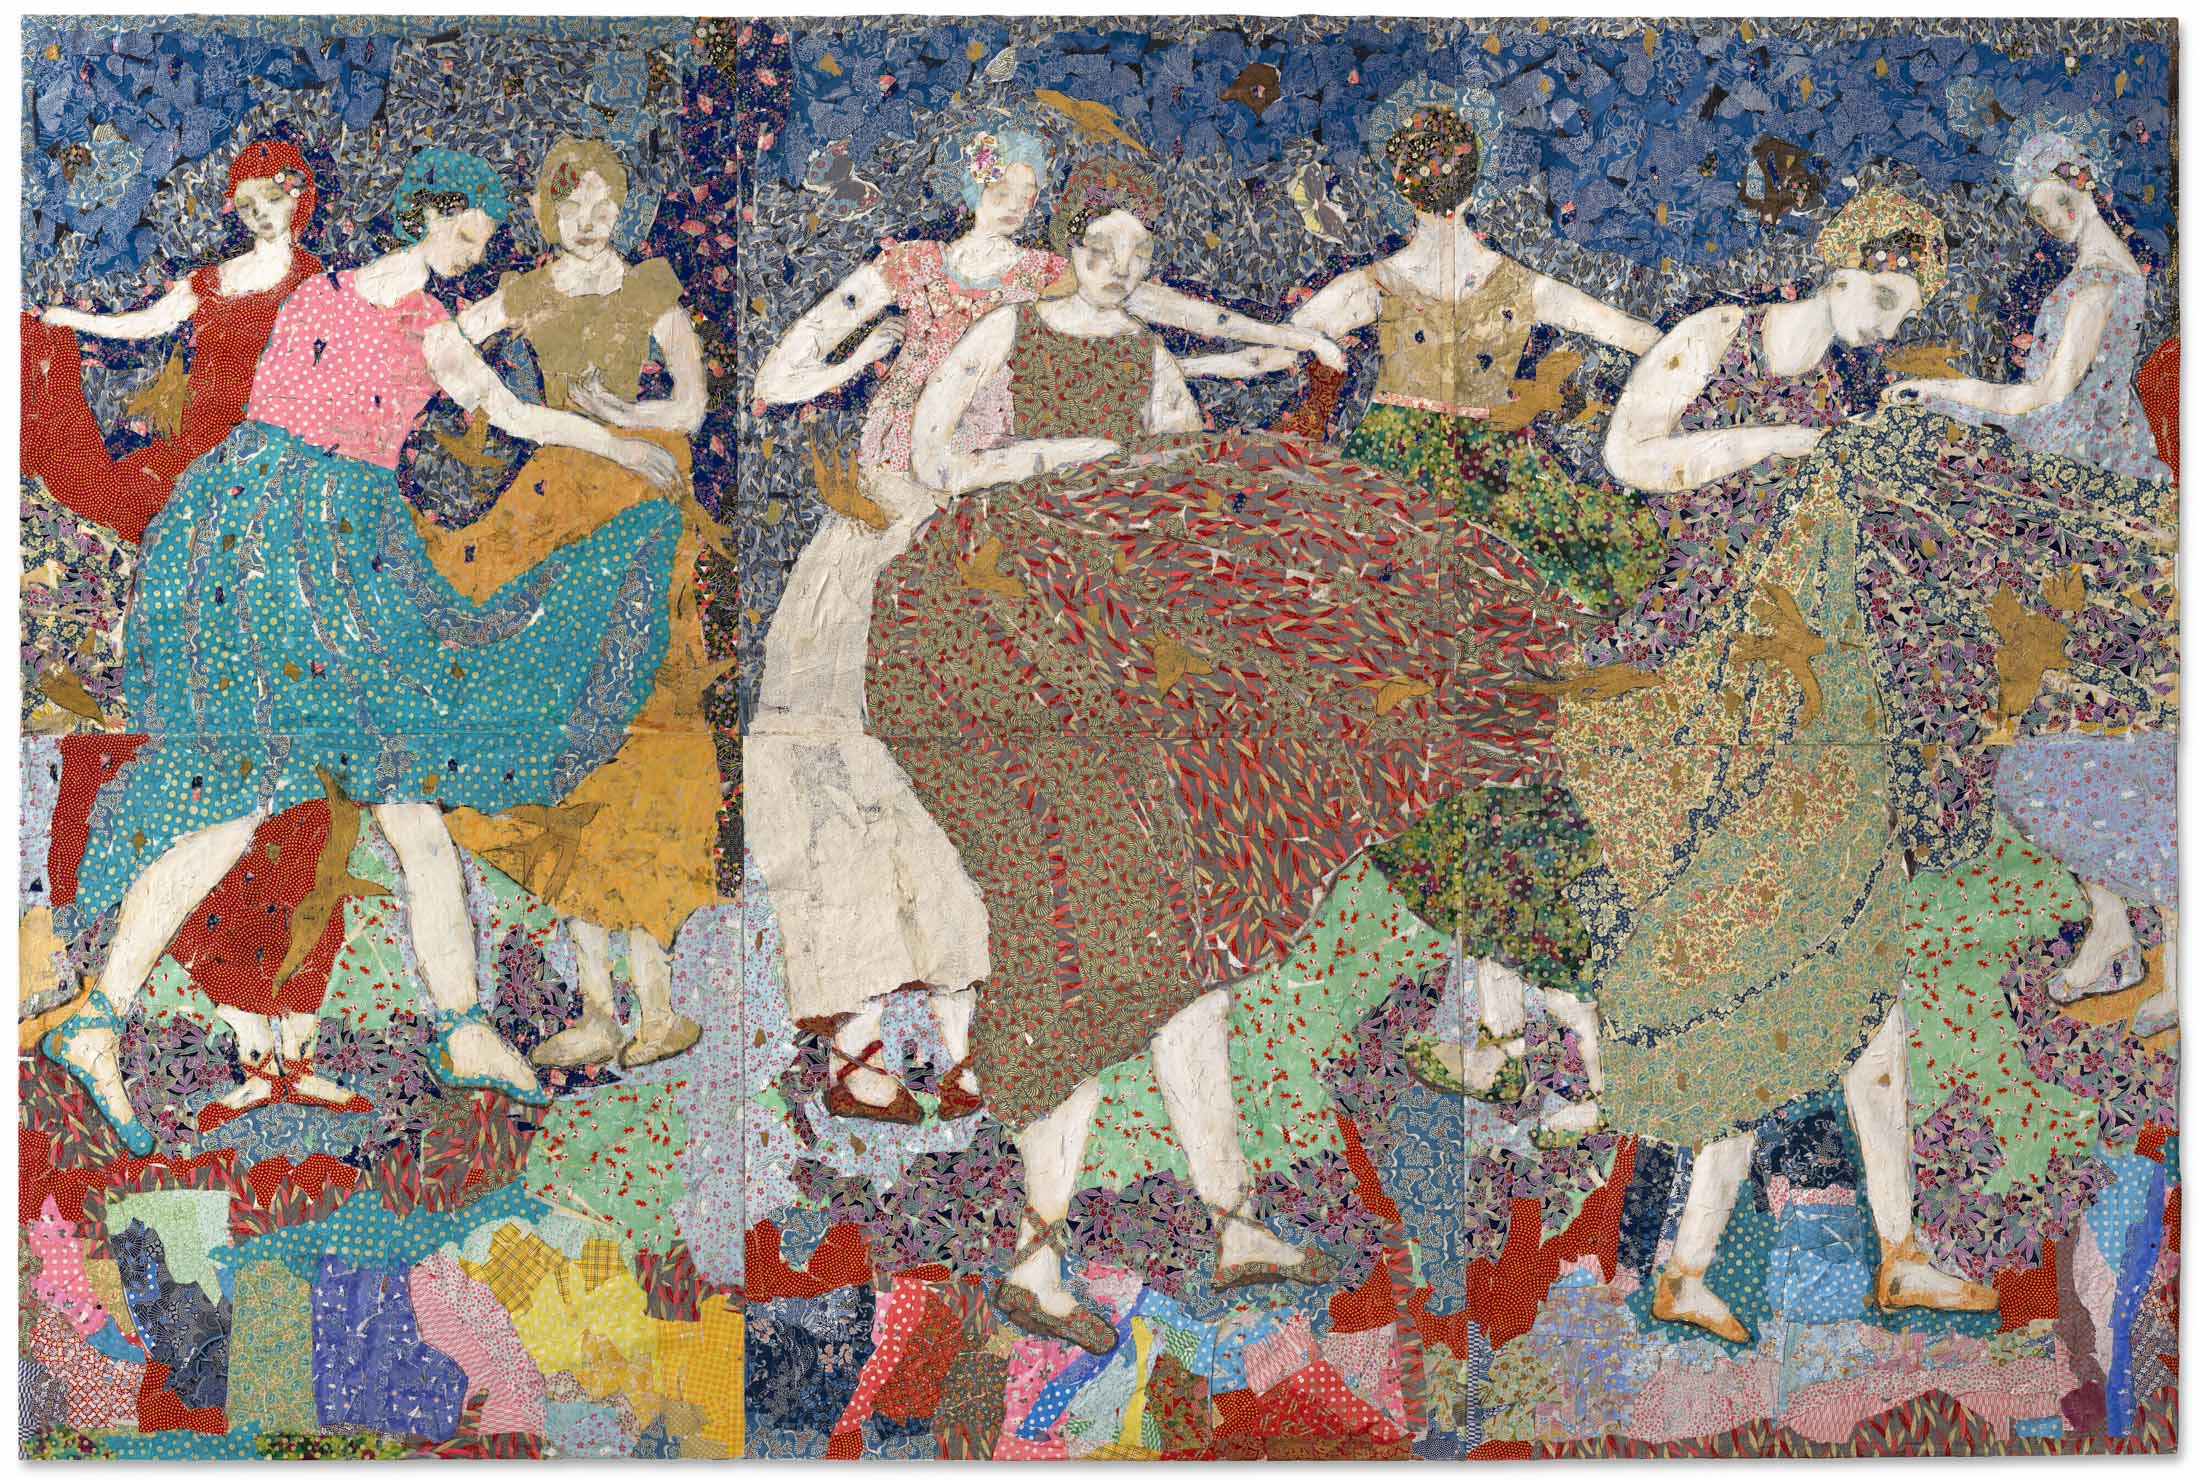 María Berrio’s&nbsp;painting The Celebration&nbsp;will go on sale Tuesday night at Christie’s 21st-century evening sale.